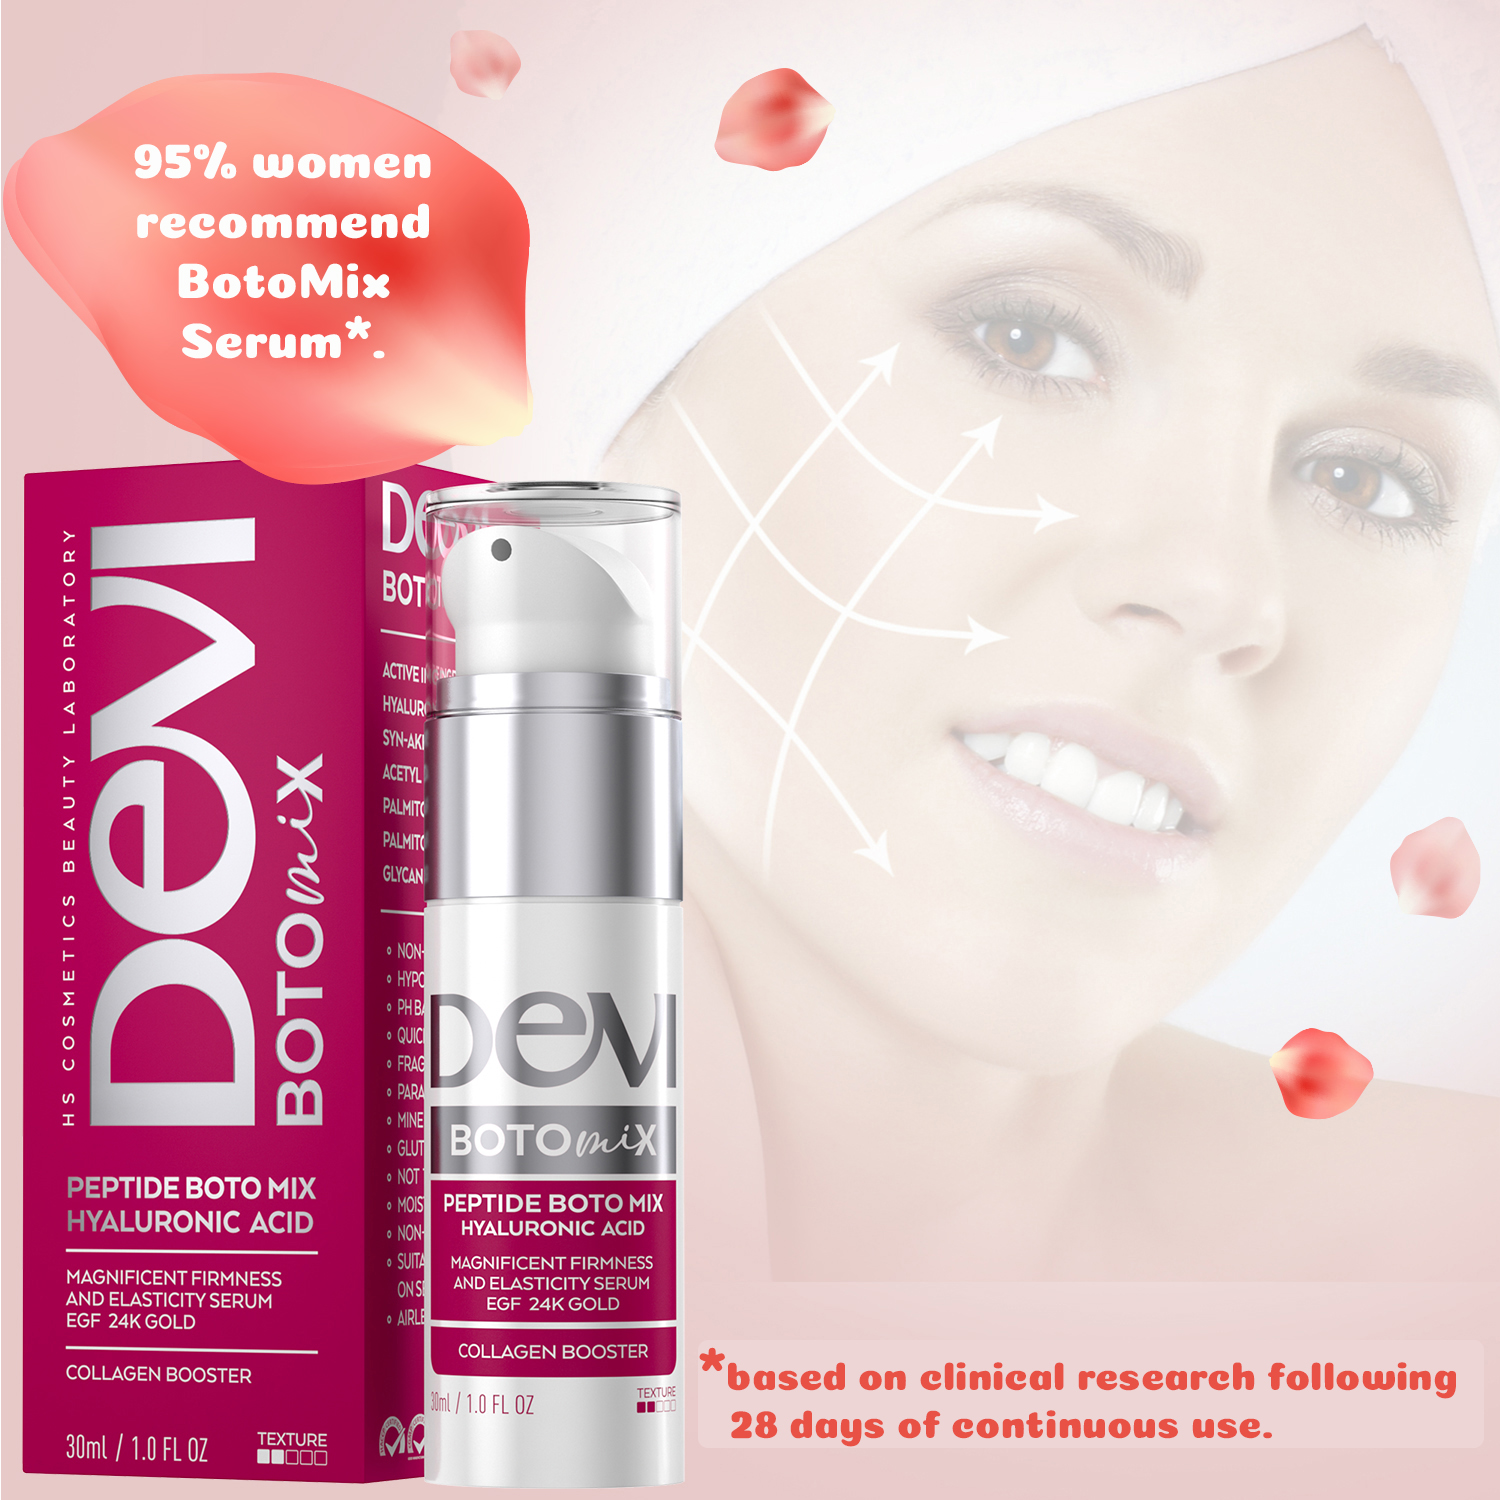 95% women recommend Botomix serum based on clinical trial 